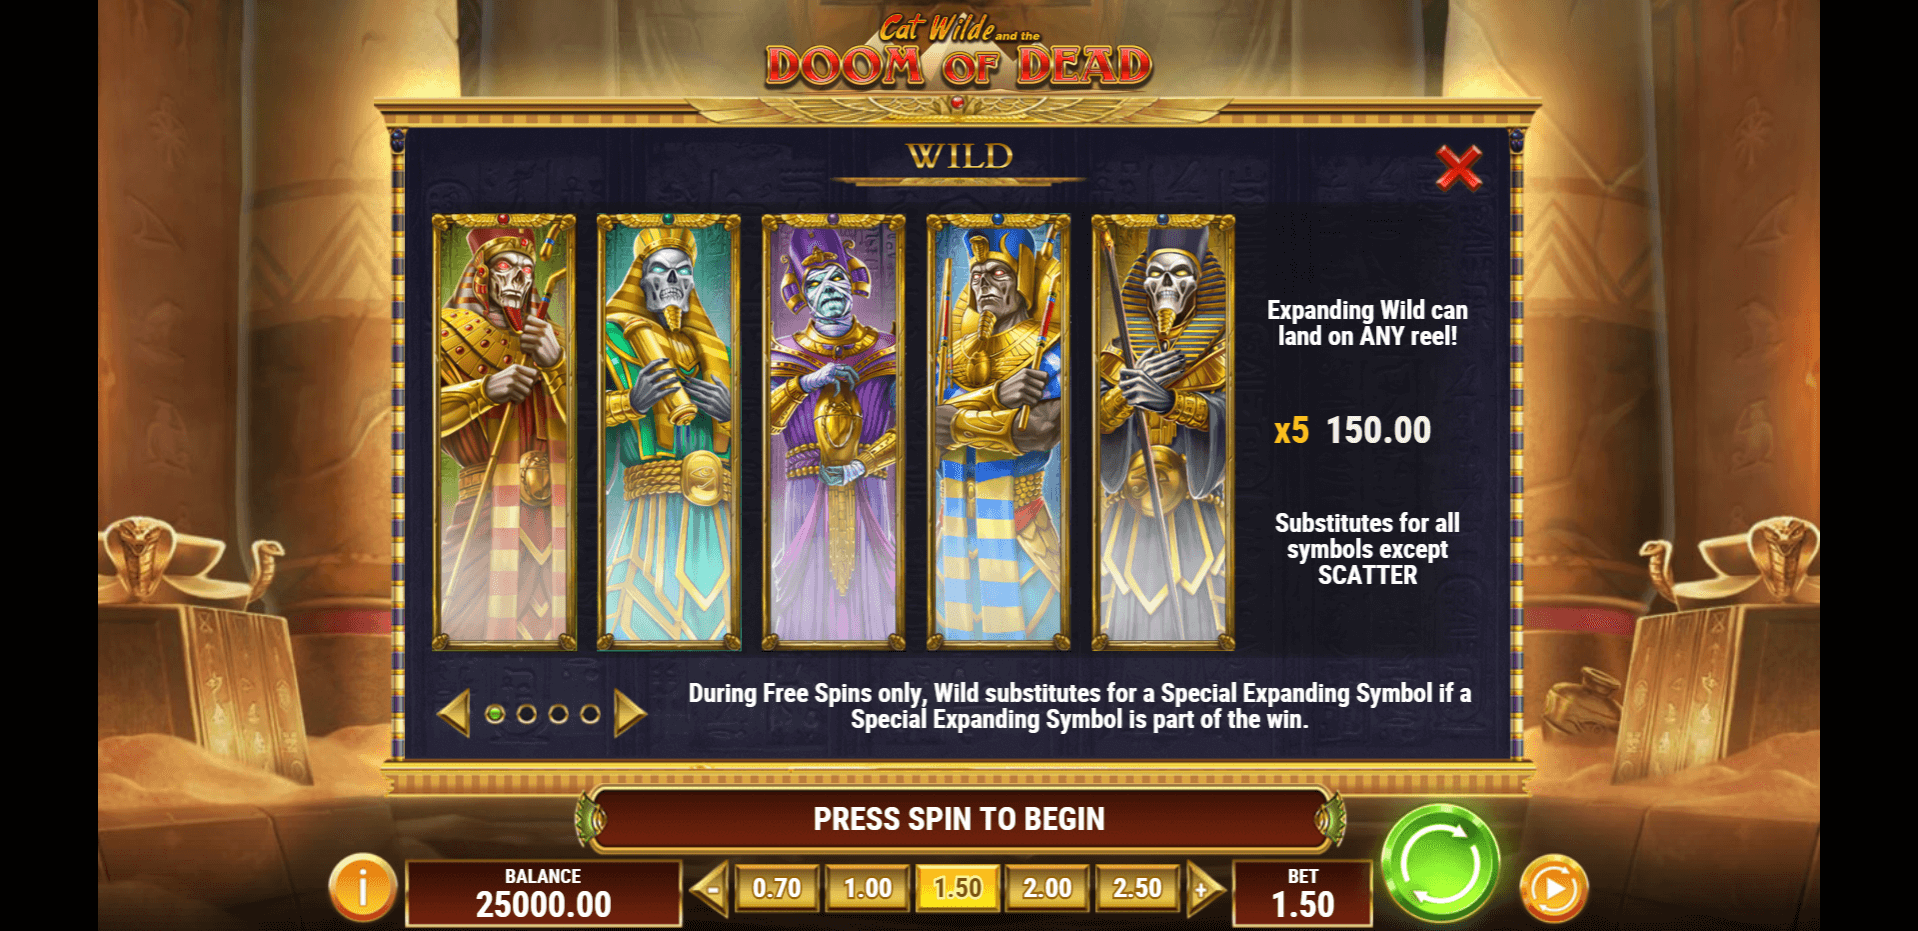 cat wilde and the doom of dead slot machine detail image 0